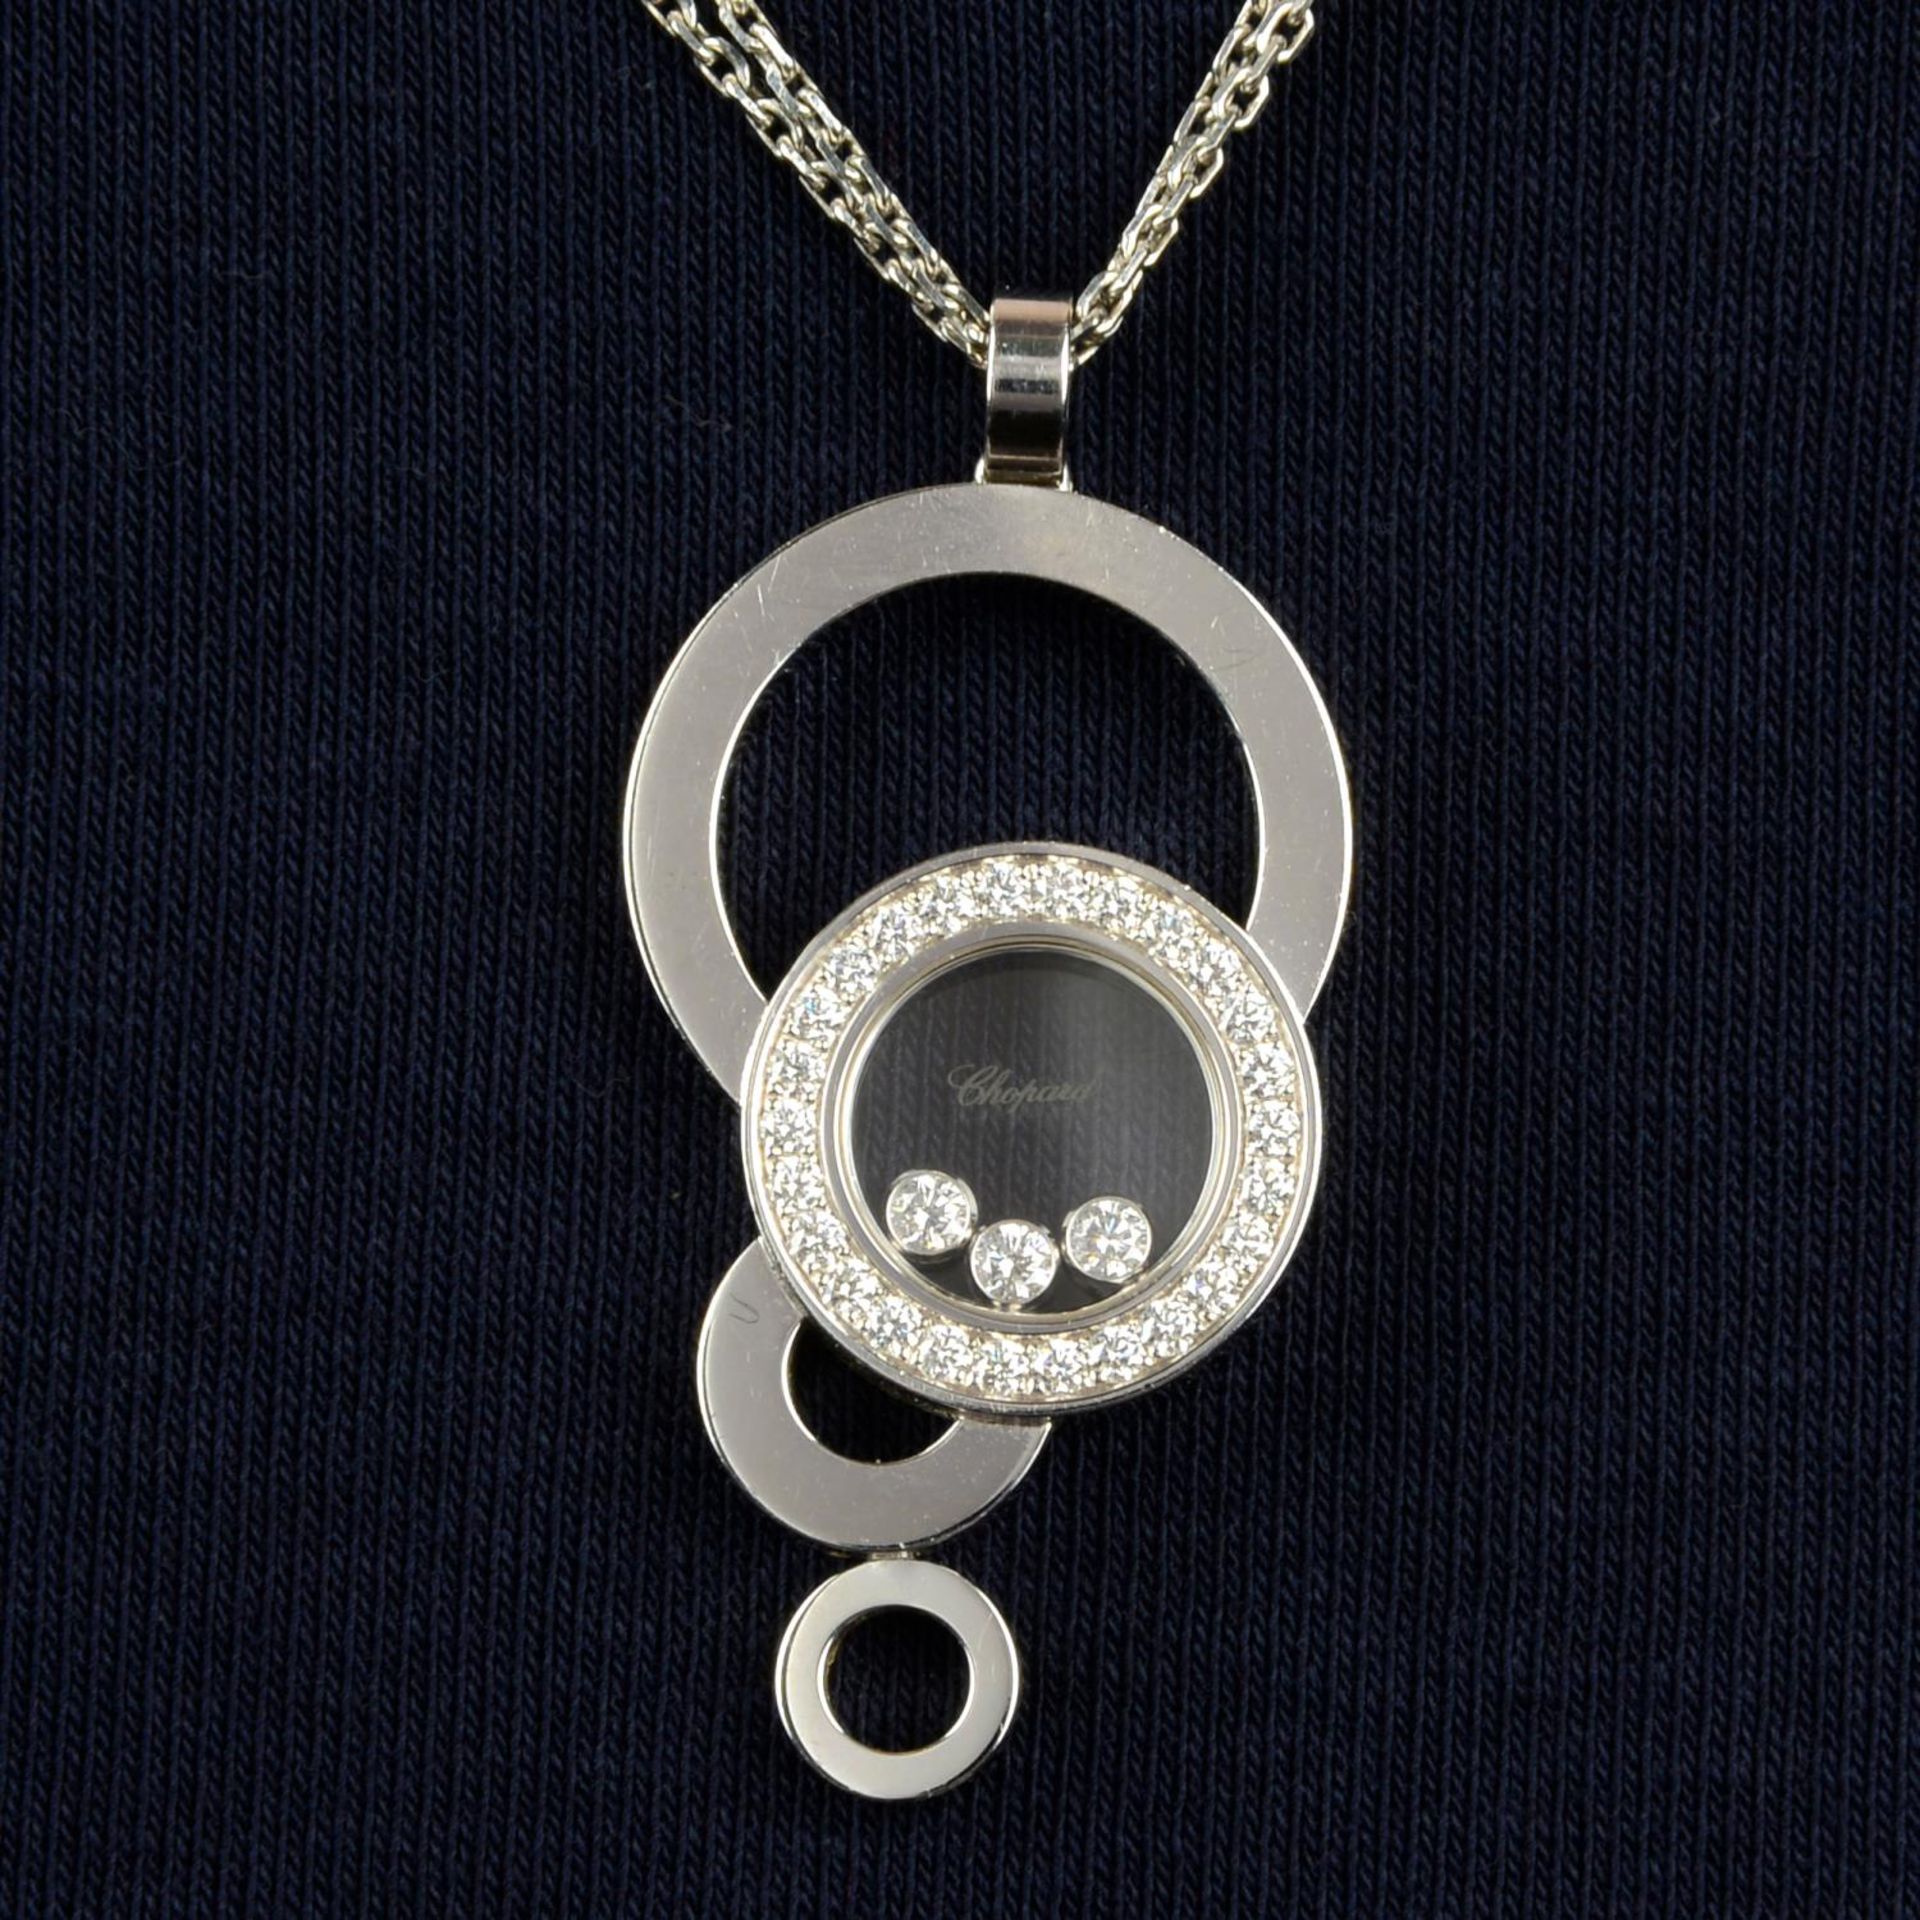 An 18ct gold diamond 'Happy Bubbles' pendant, with chain, by Chopard.